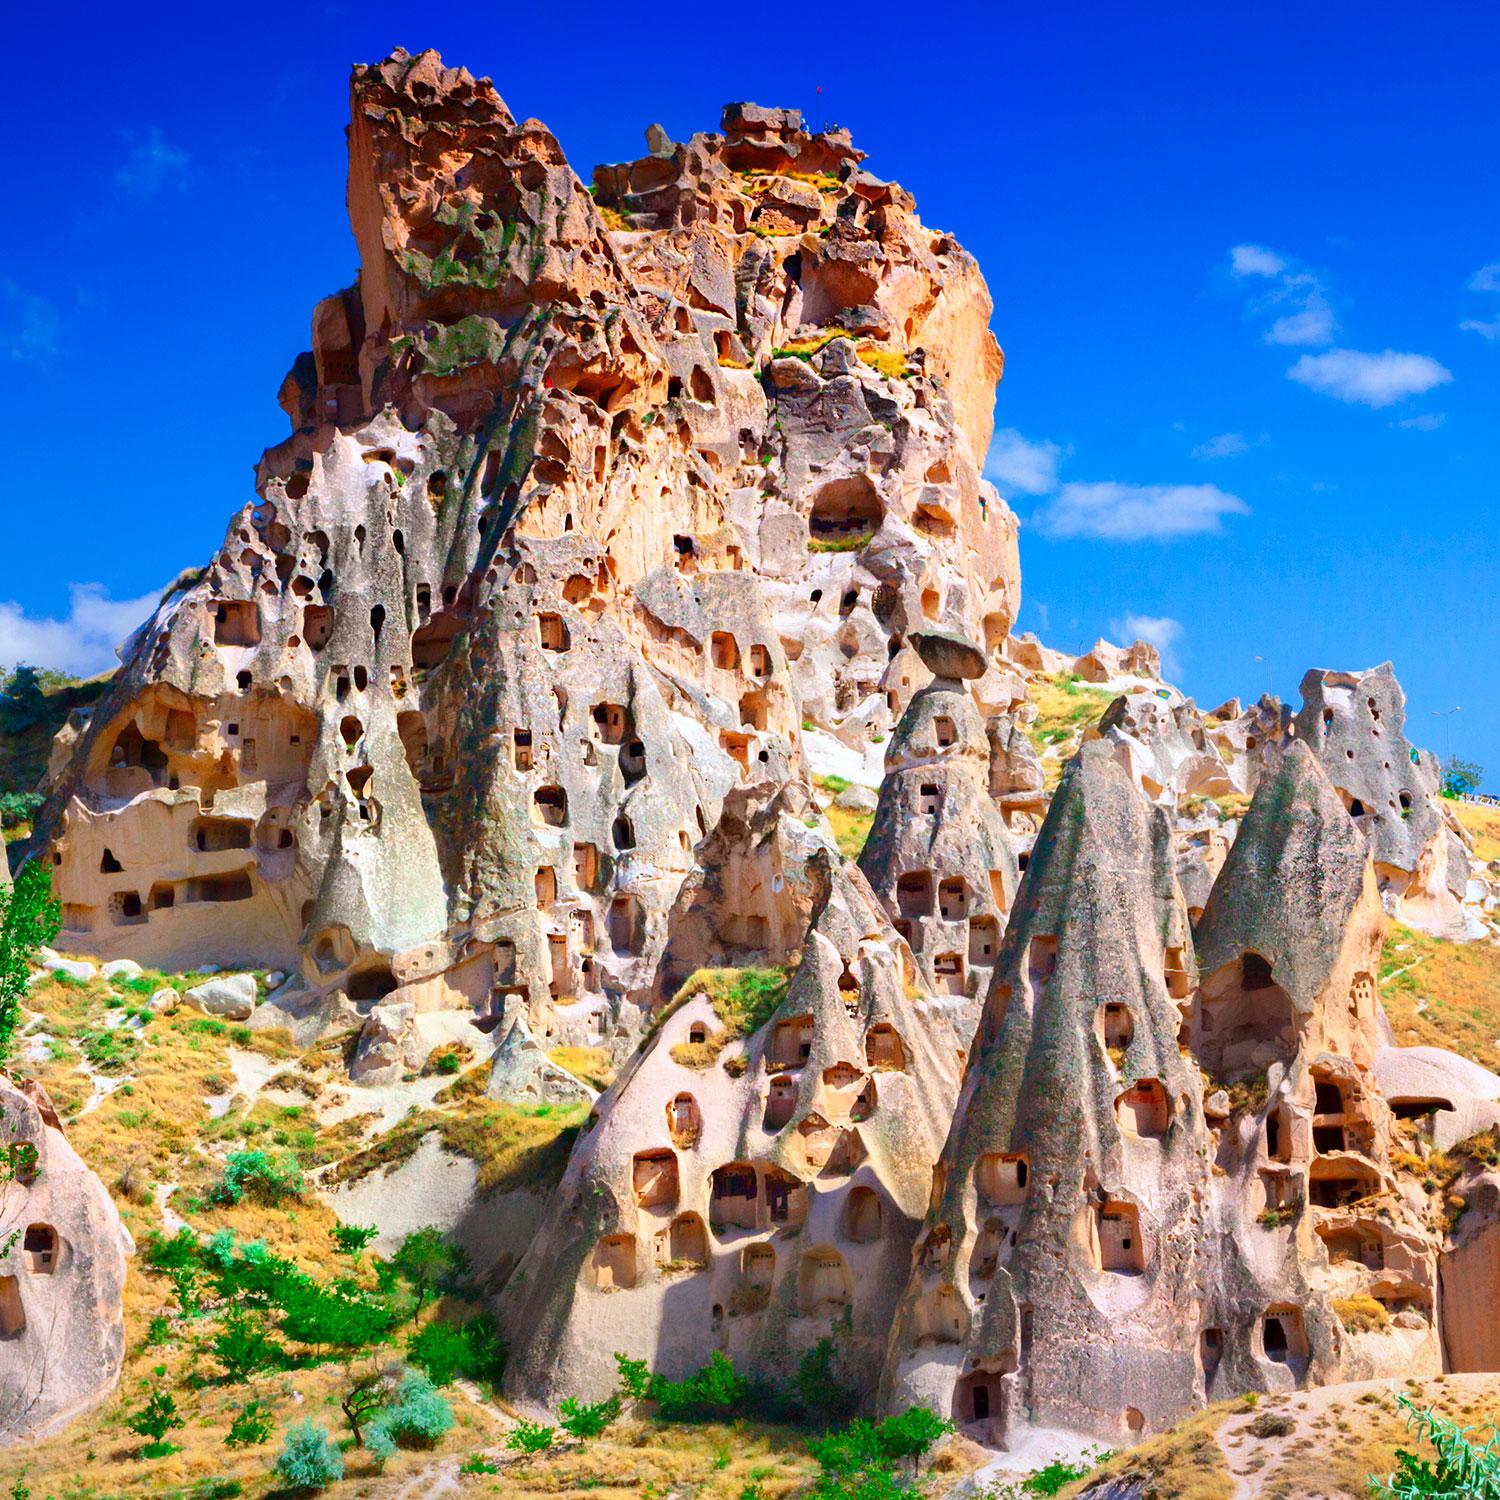 The 60-metre-high Uçhisar castle-mountain is crisscrossed by many underground passageways and rooms which served as residential areas as well as cloisters in Byzantine times. Originally around 1000 people lived in the castle, but it is no longer inhabited today. Nevşehir Province, Turkey